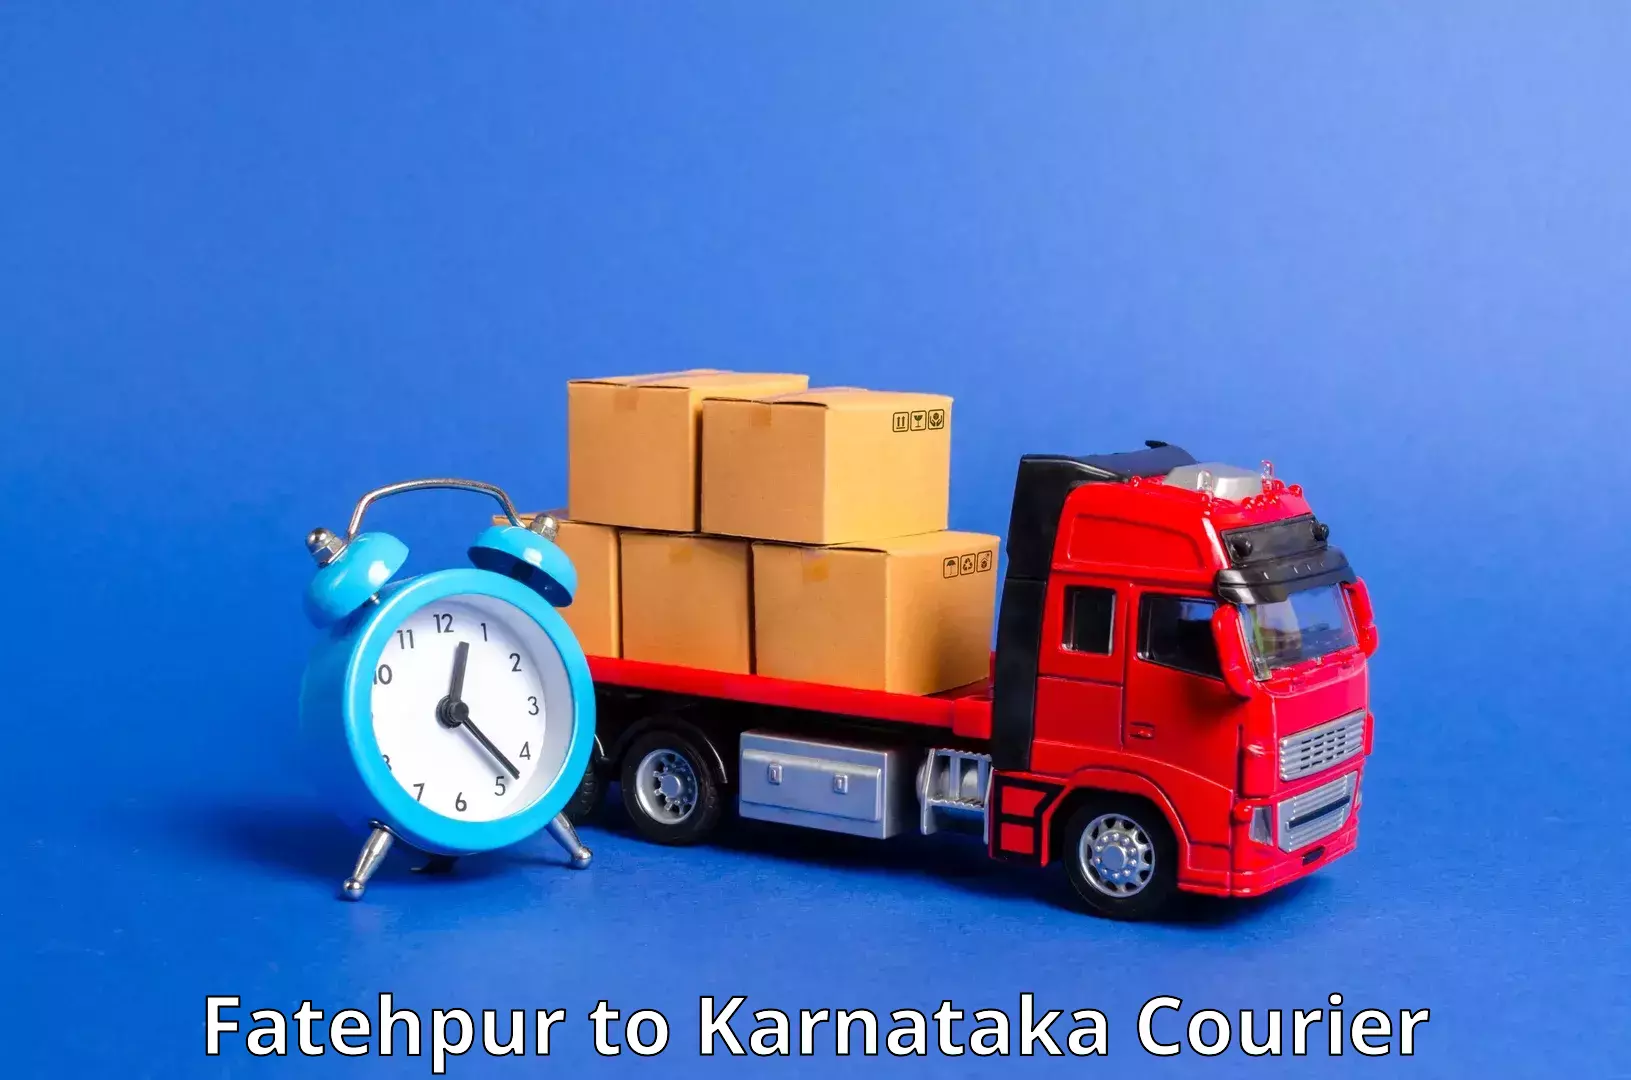 Doorstep delivery service Fatehpur to Bhatkal